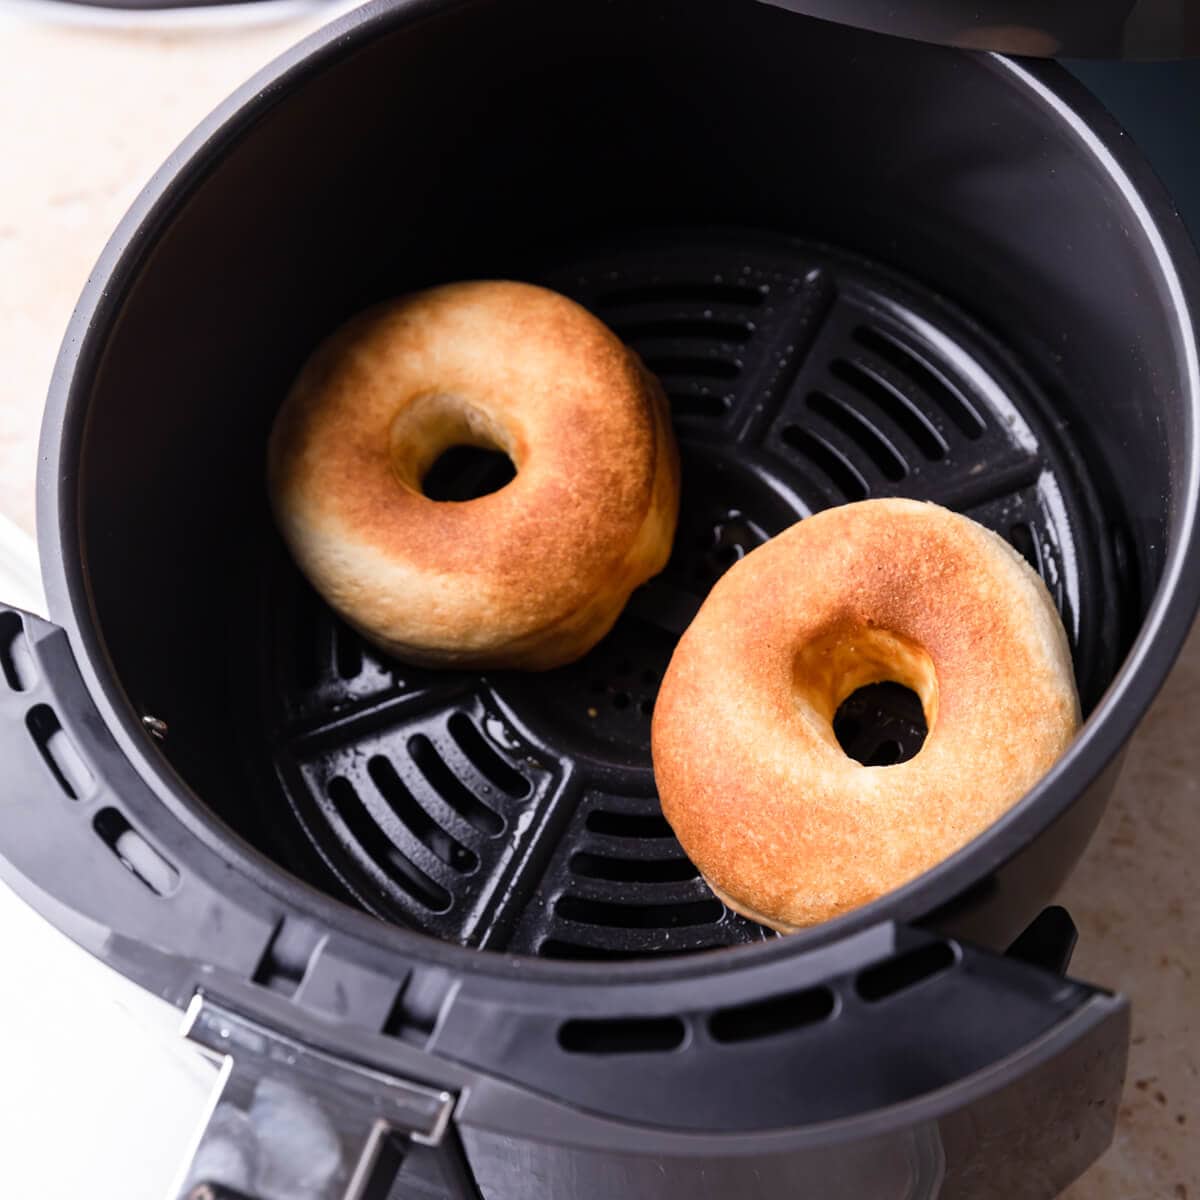 couple of doughnuts in a basket of an air fryer.